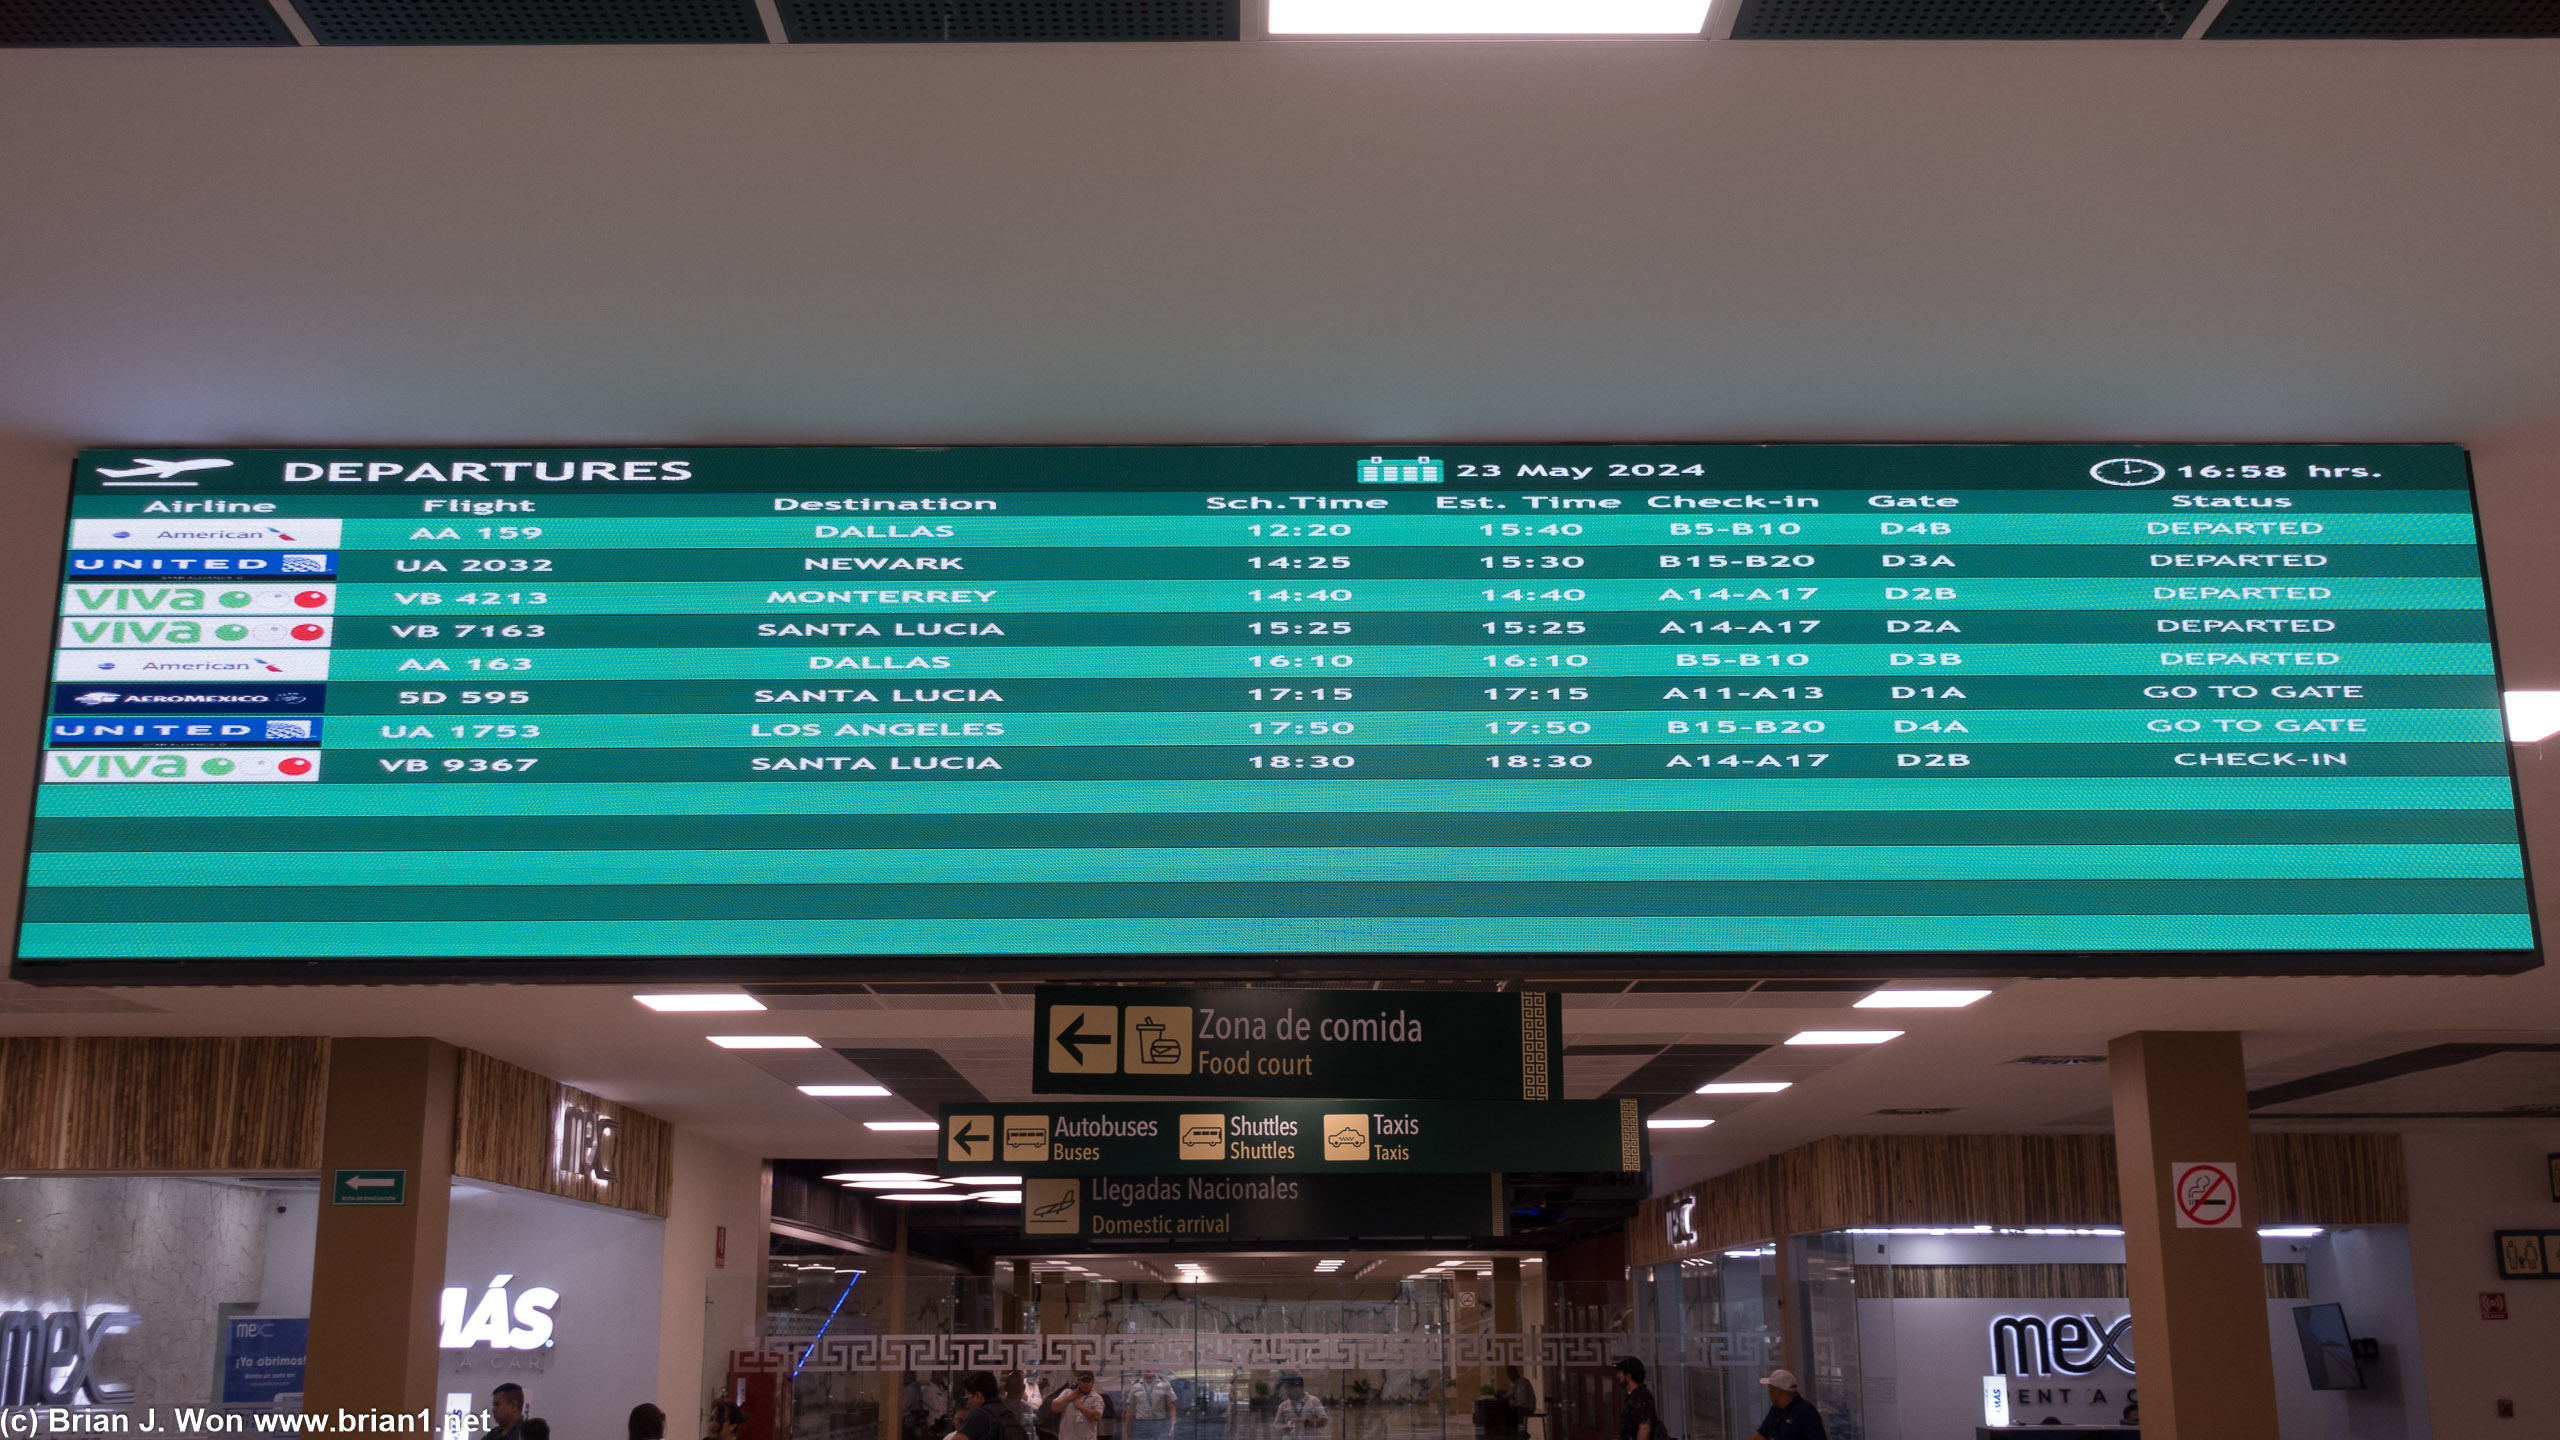 Arrivals and departures board. UA 1753, TQO-LAX, departing in just over an hour.